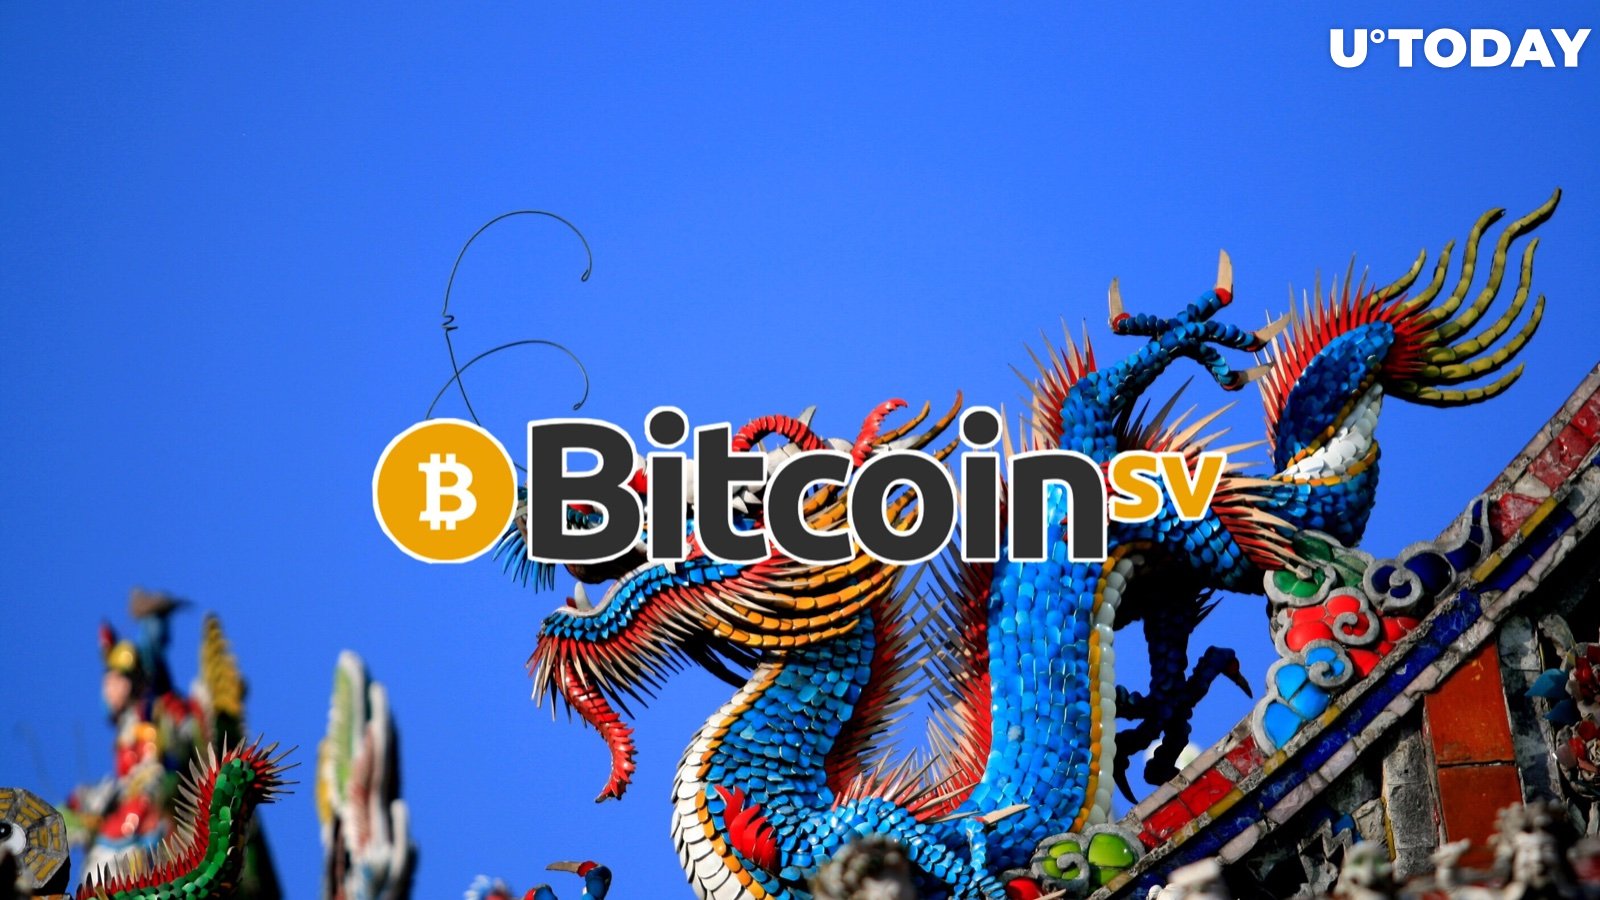 Bitcoin SV Loses $300 Mln After #DELISTBSV Controversy Tanked Its Price. What Will Be Craig Wright's Next Move?